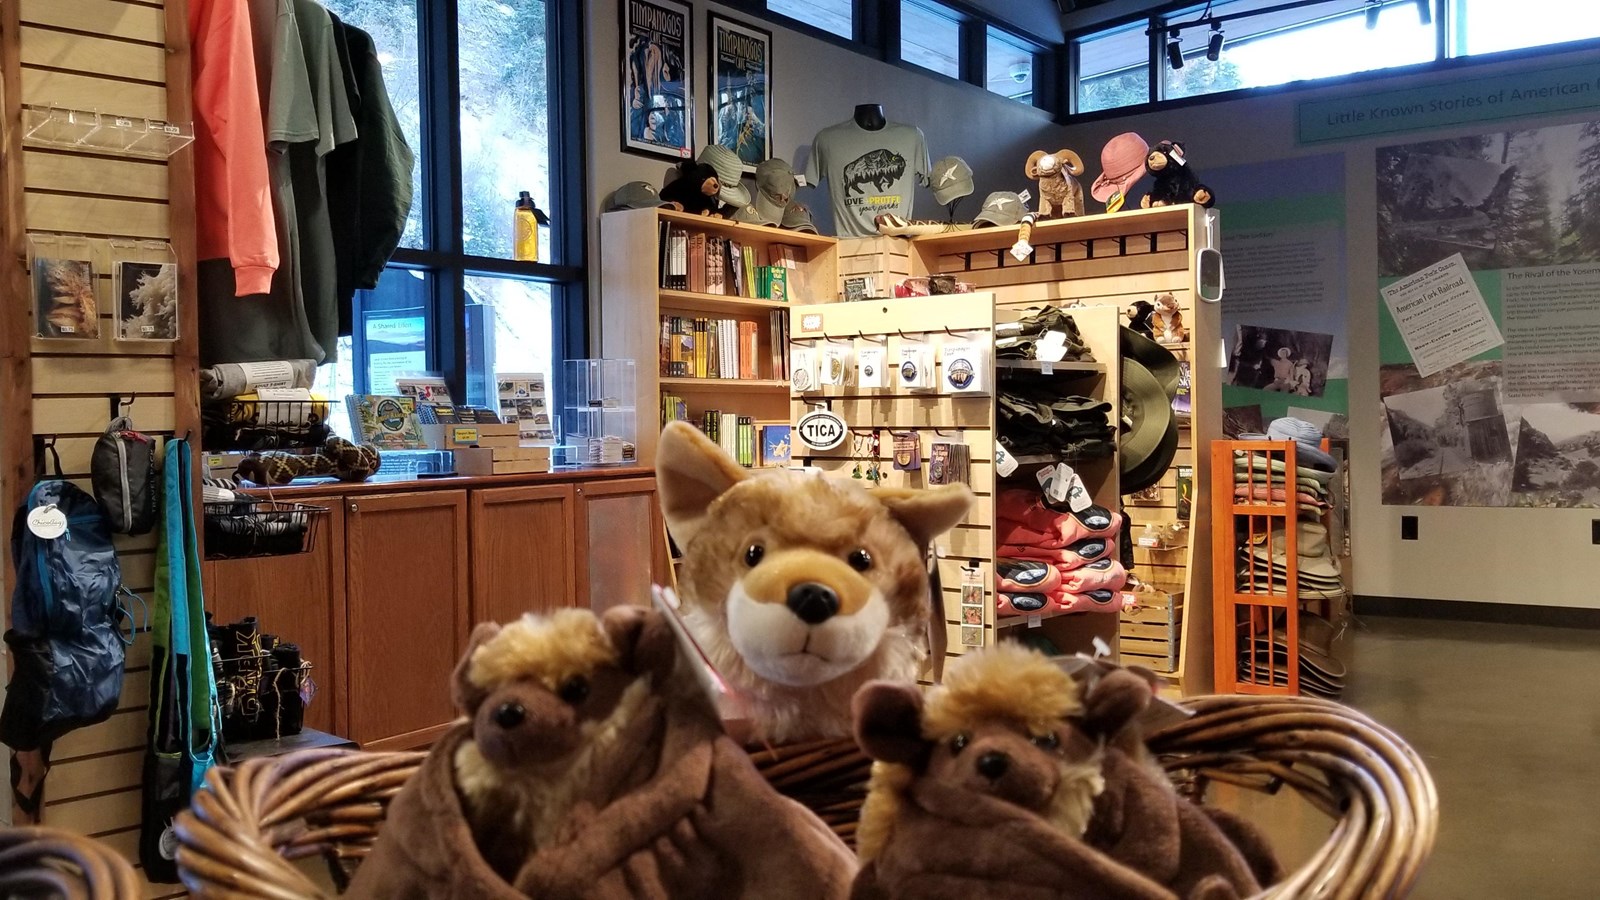 Stuffed Animals in front of books